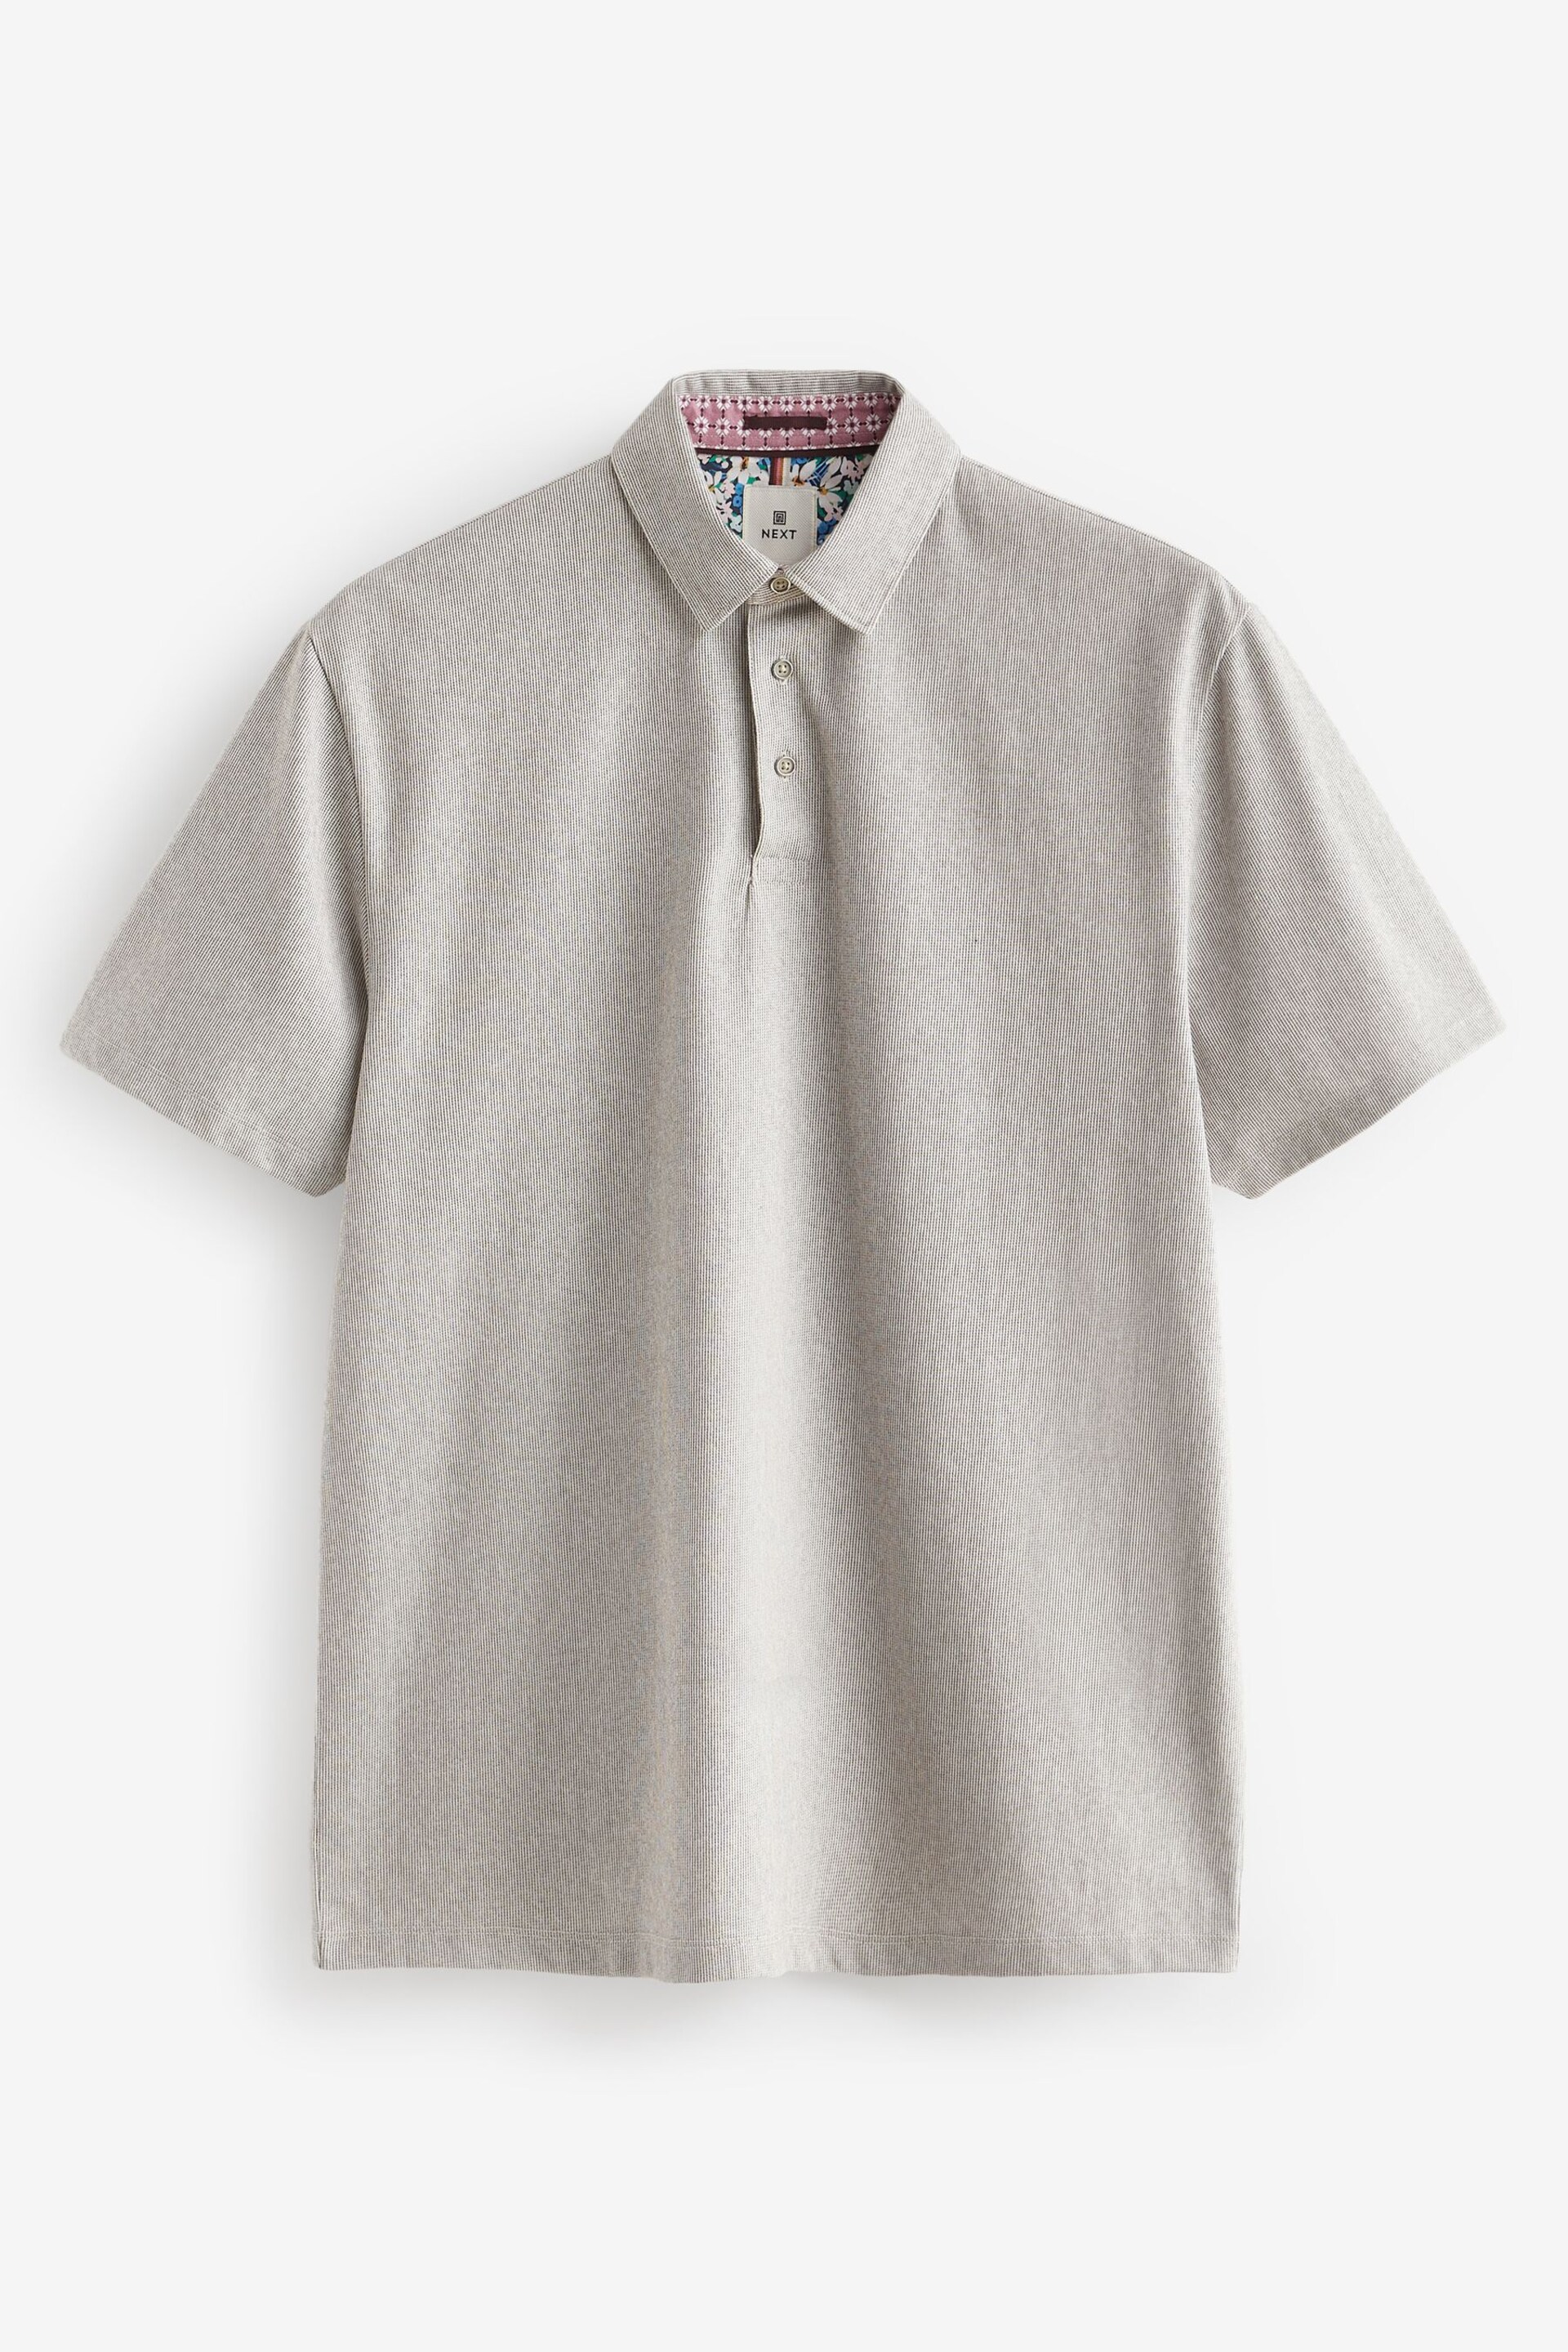 Neutral Oxford Cotton Blend Polo Shirt - Image 6 of 8